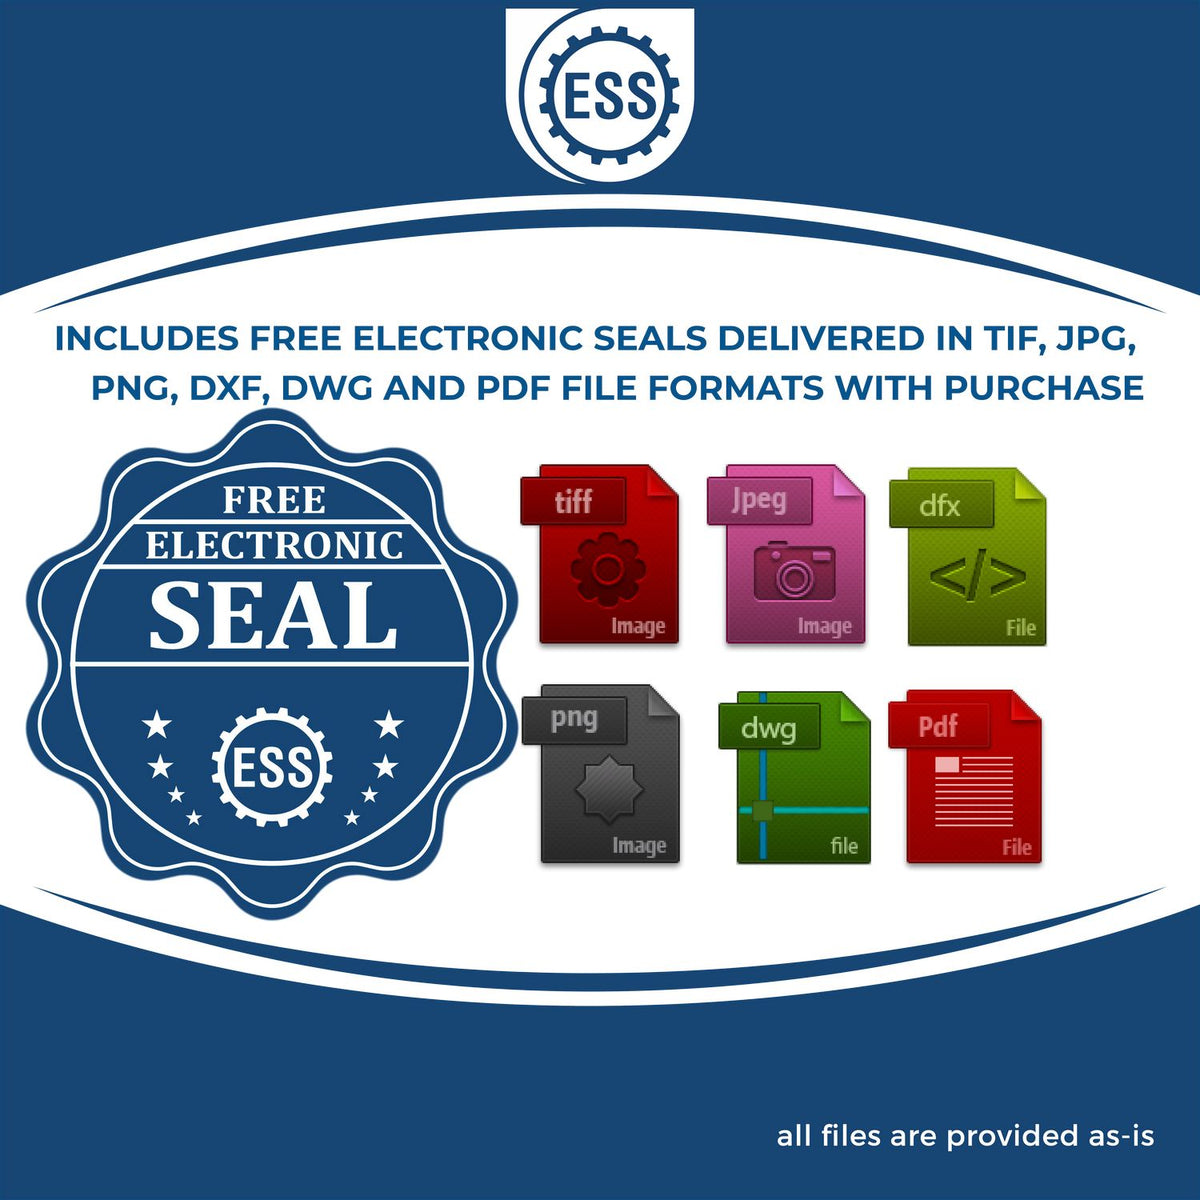 An infographic for the free electronic seal for the Maryland Geologist Desk Seal illustrating the different file type icons such as DXF, DWG, TIF, JPG and PNG.